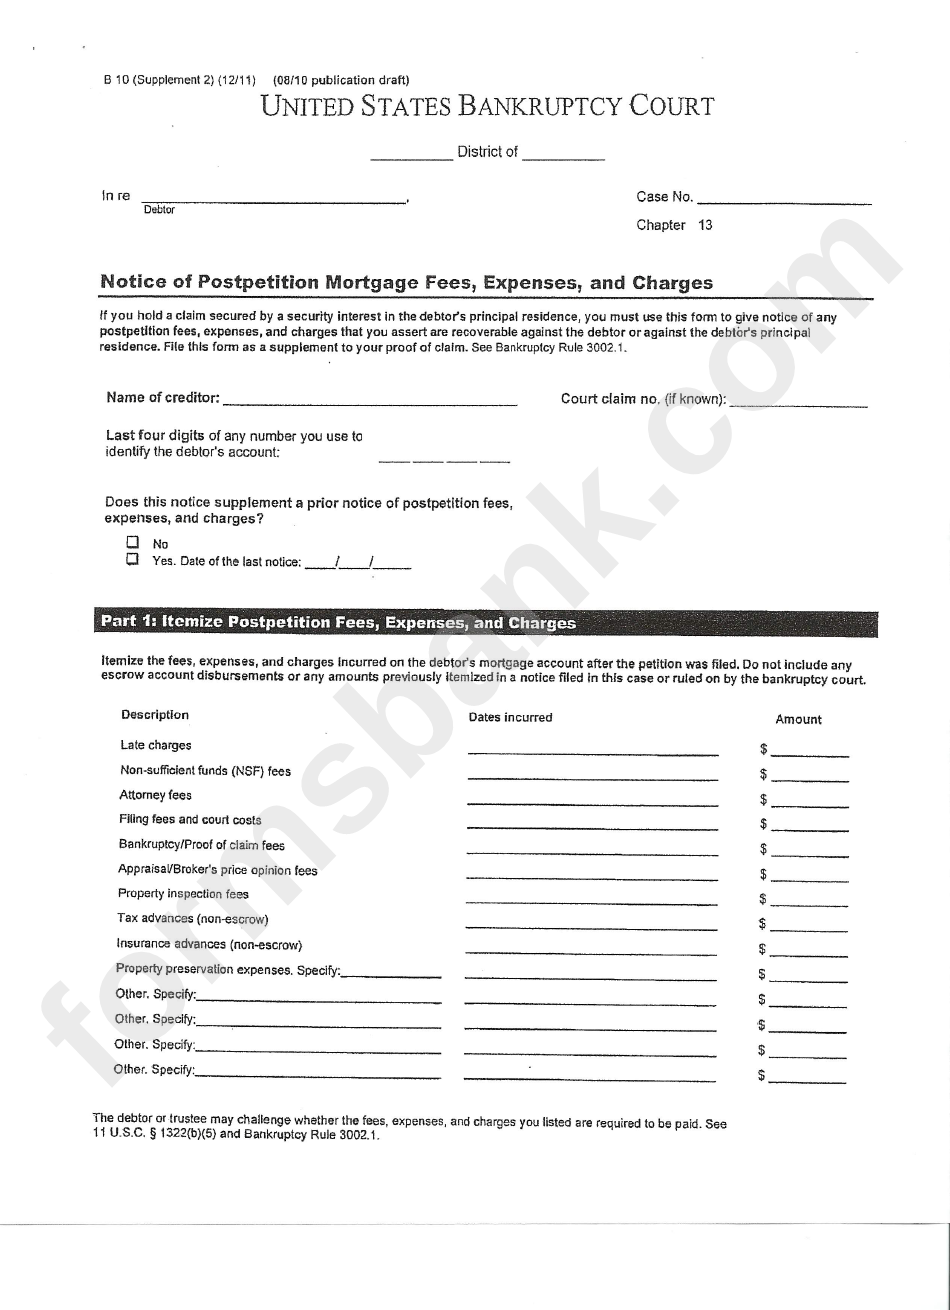 B10 Form - Notice Of Postpetition Mortgage Fees, Expenses, And Charges